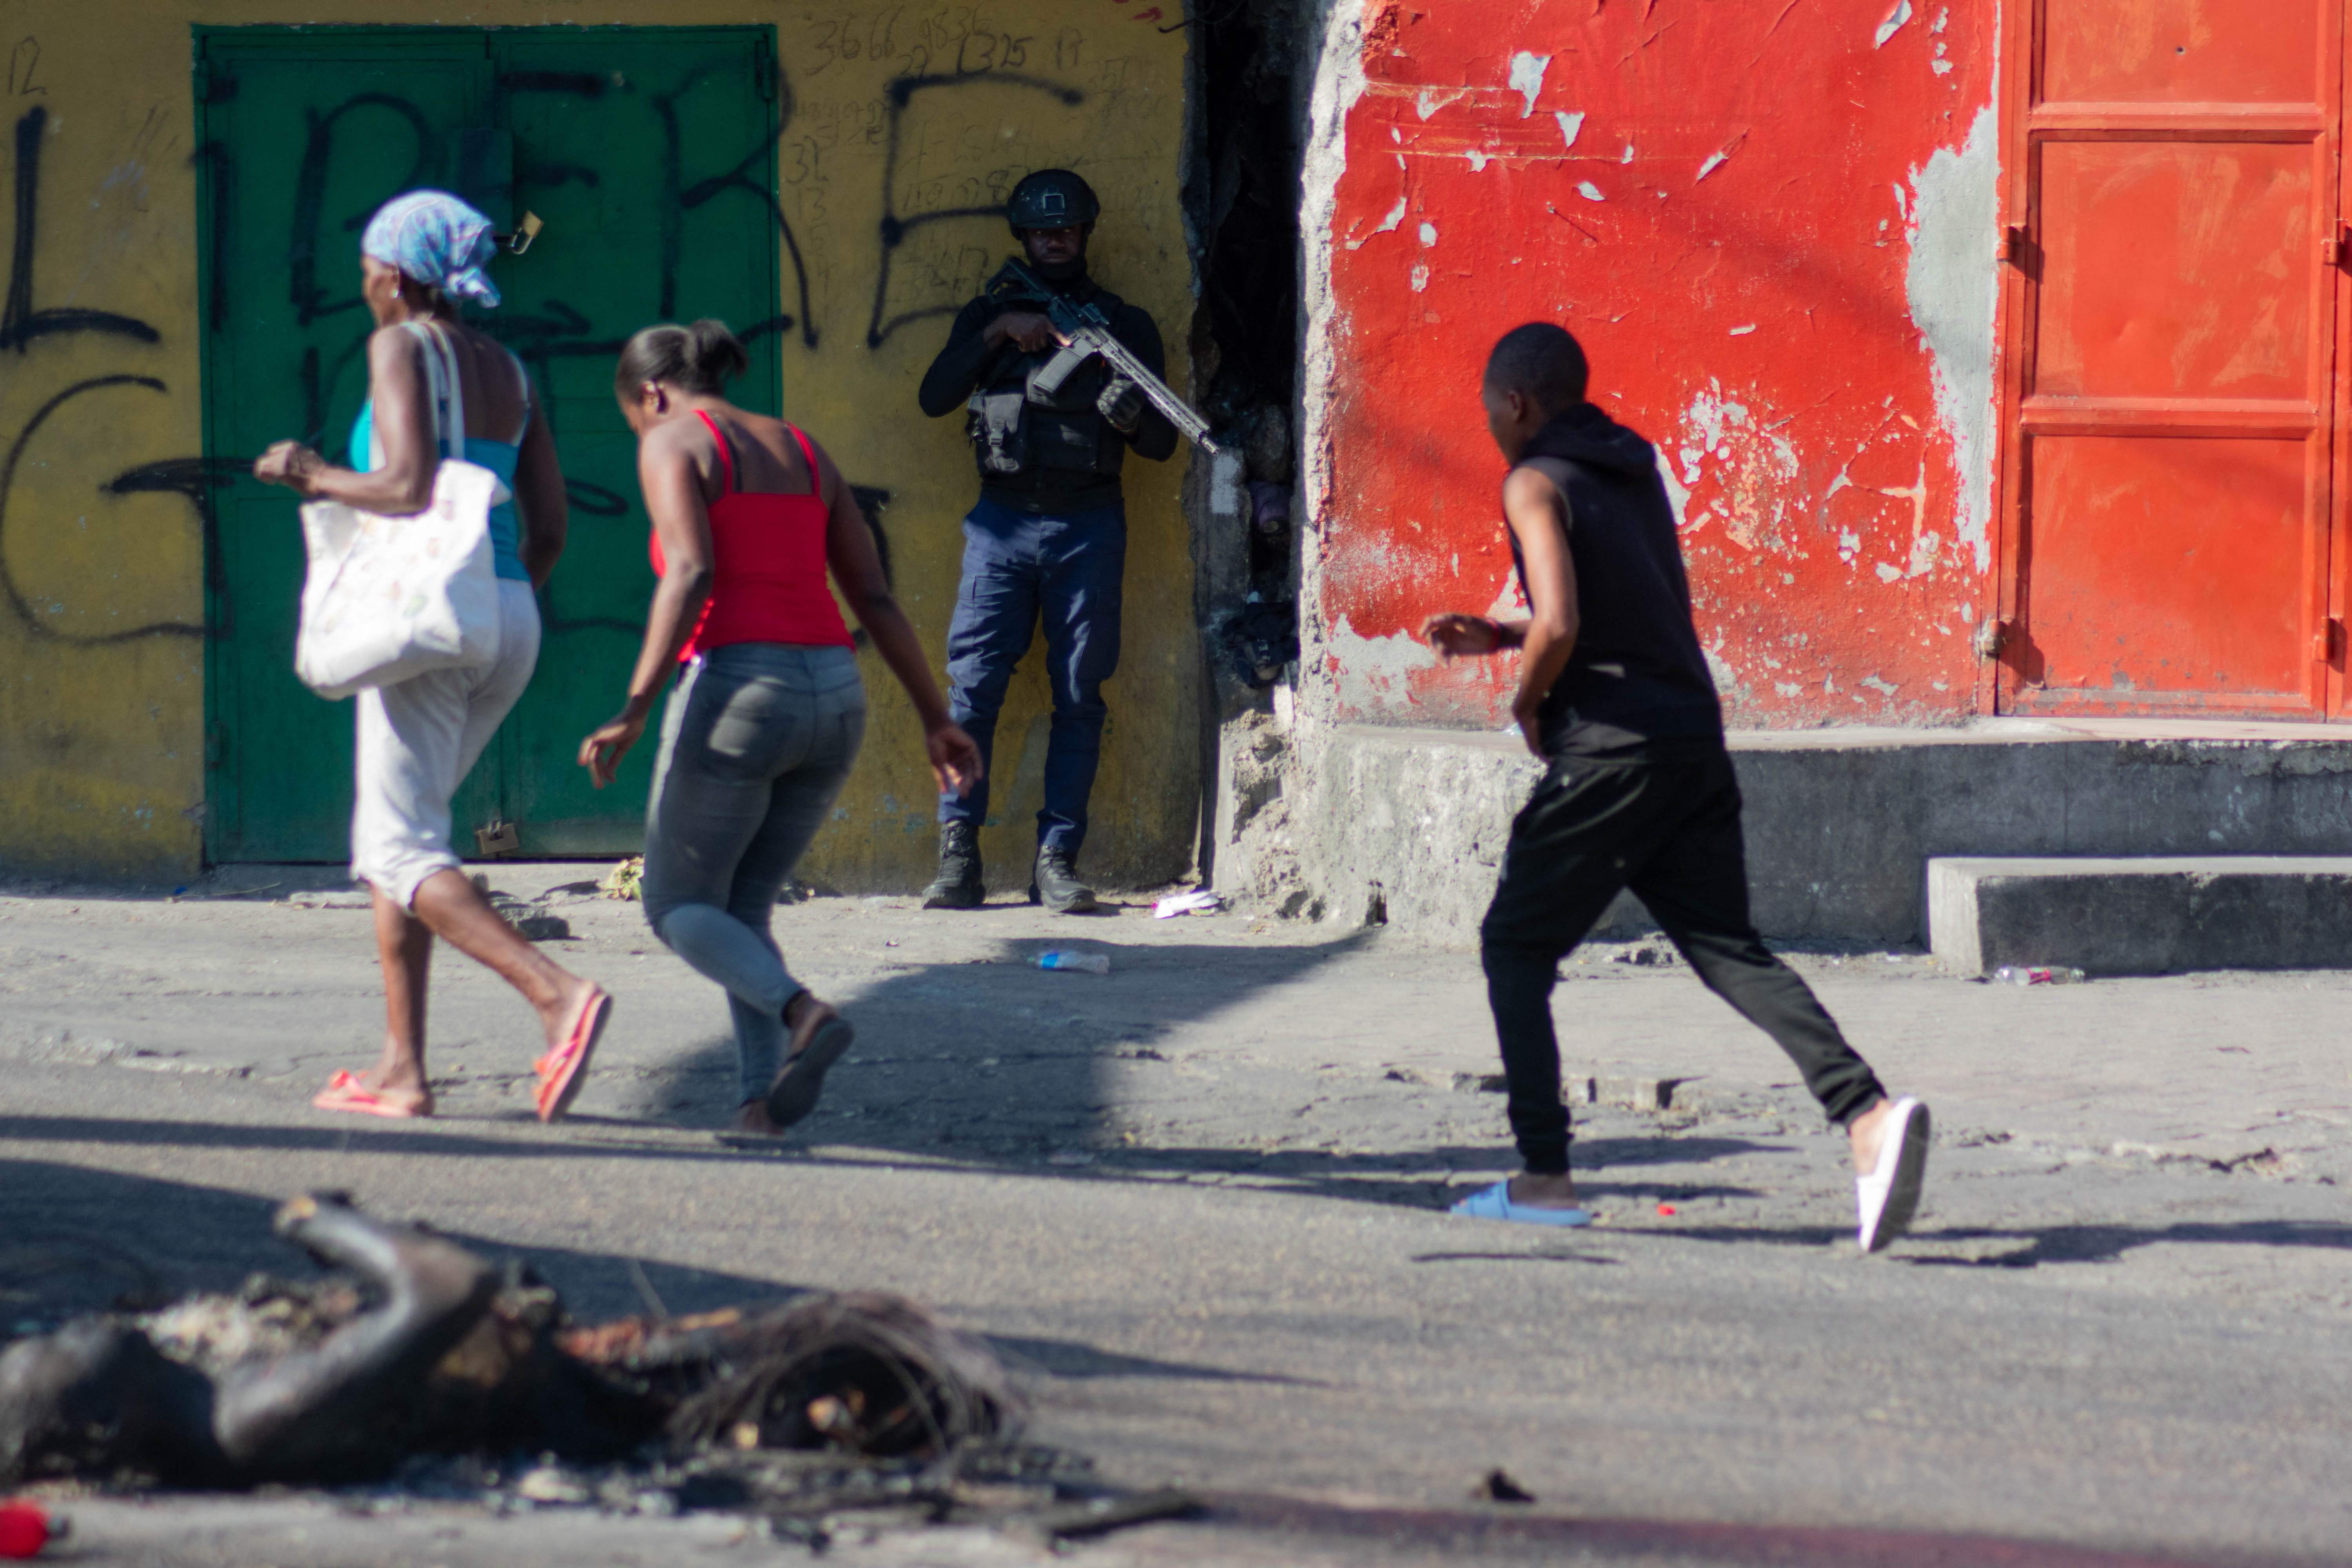 EDITORS NOTE: Graphic content / People walk past burned bodies and an armed police officer monitoring a street after gang violence in the neighborhood on the evening of March 21, 2024, in Port-au-Prince, Haiti, March 22, 2024. More than 33,000 people fled Port-au-Prince this month as the Haitian capital was overrun by well-armed gangs triggering political chaos in the impoverished Caribbean nation, the United Nations has said. (Photo by Clarens SIFFROY / AFP)